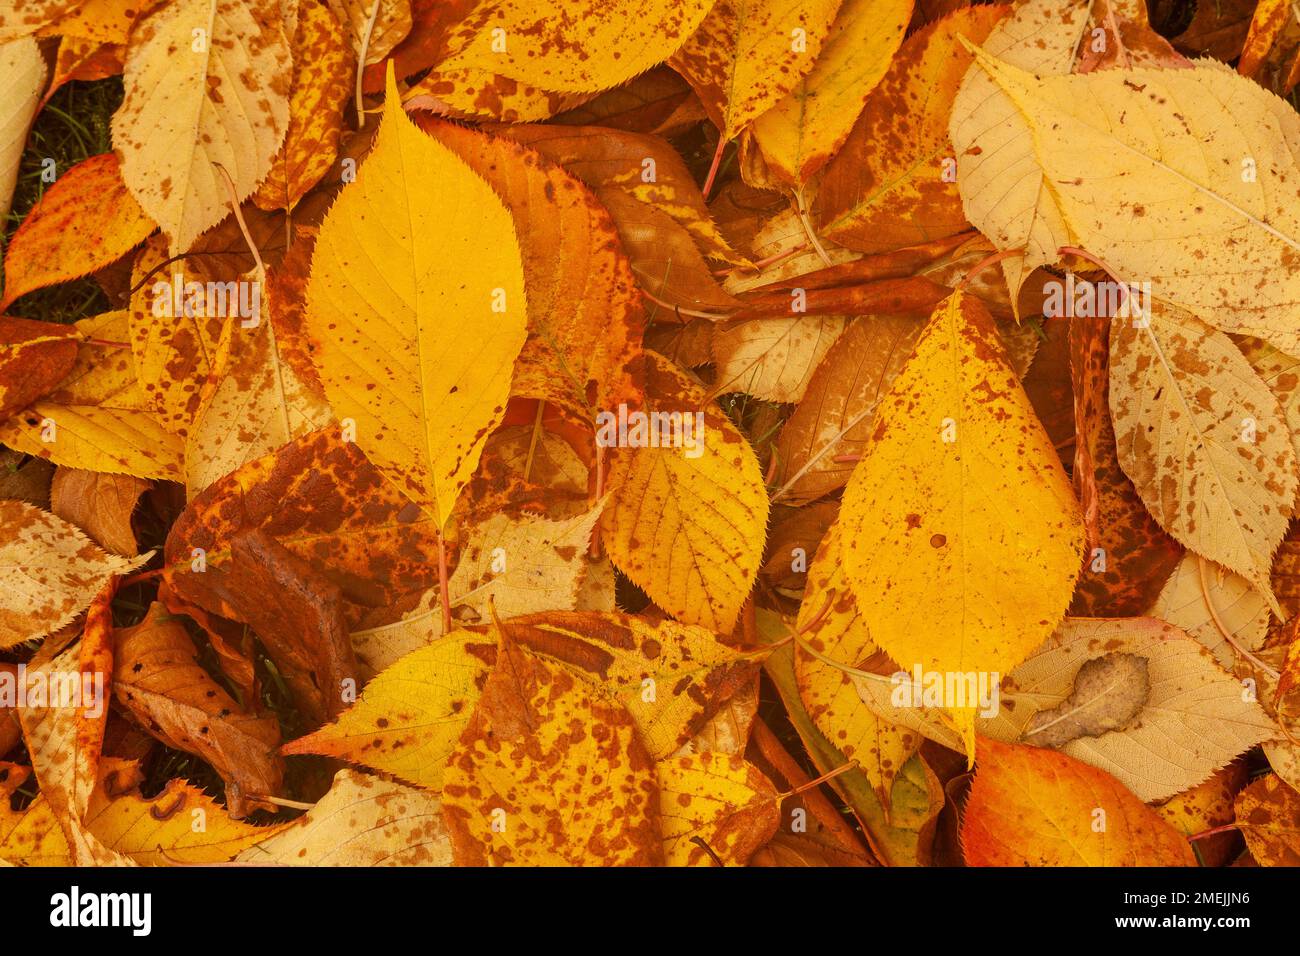 Fallen beech tree leaves in autumnal colours Stock Photo